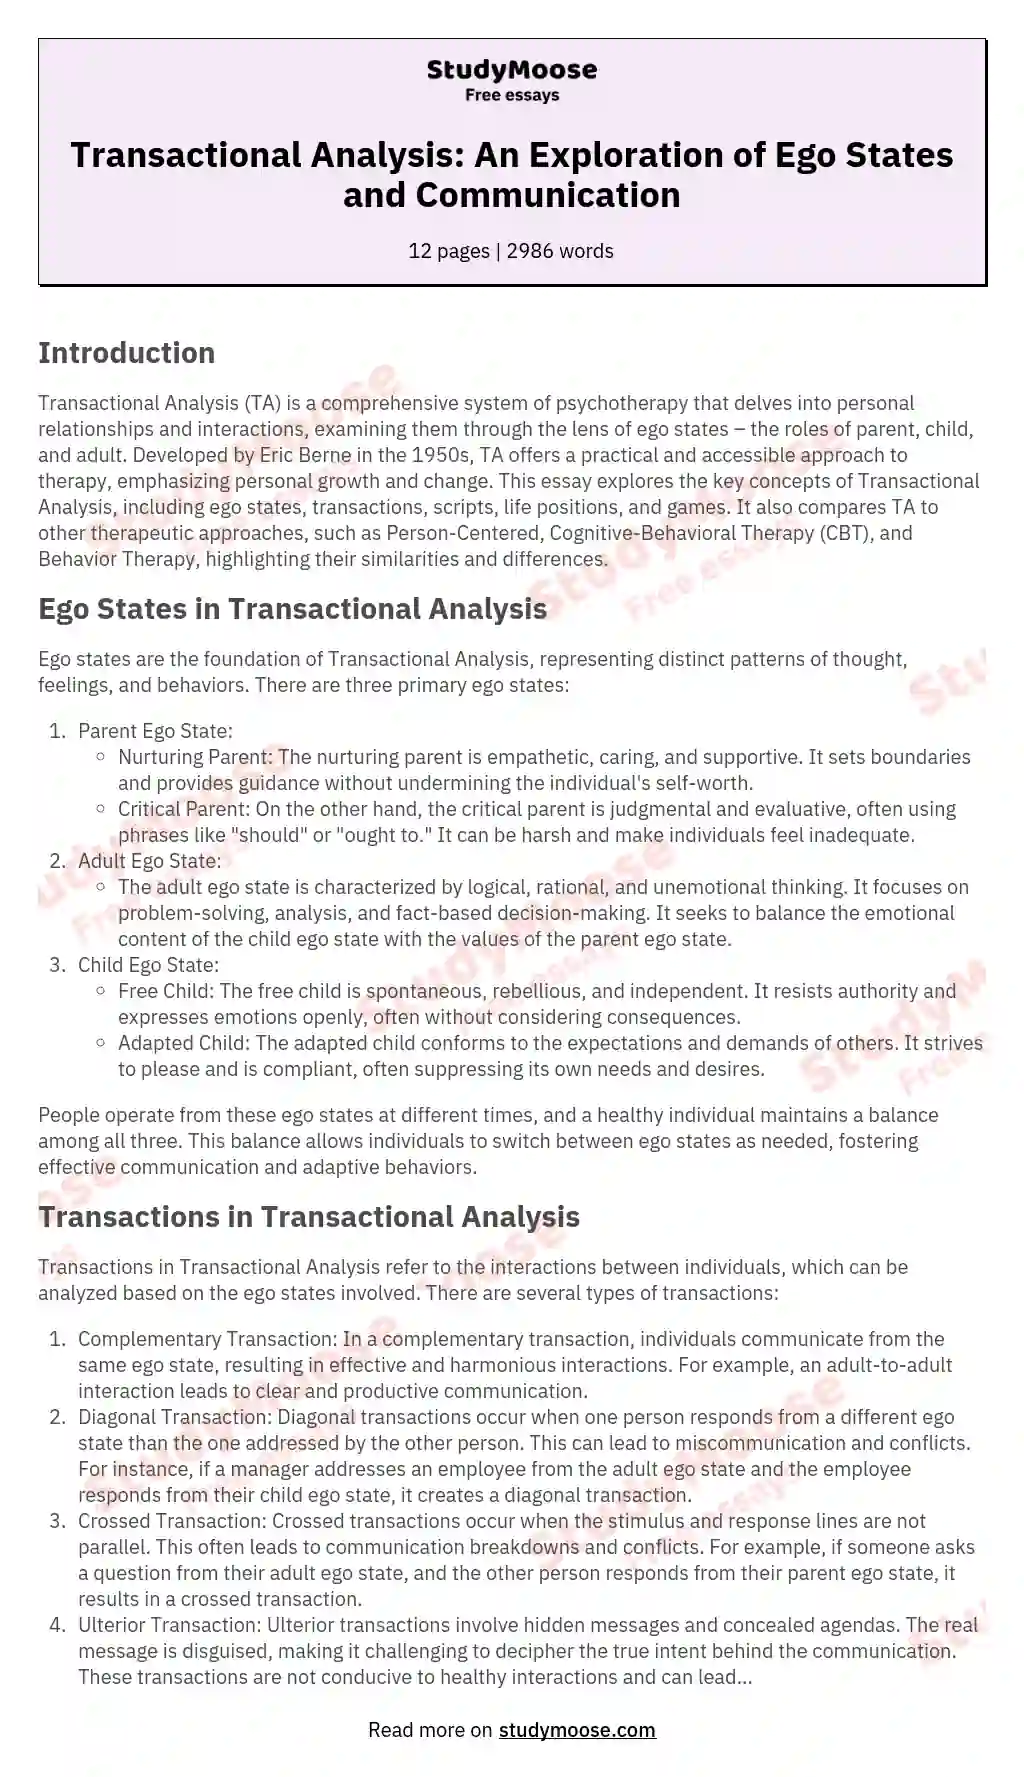 Transactional Analysis: An Exploration of Ego States and Communication essay